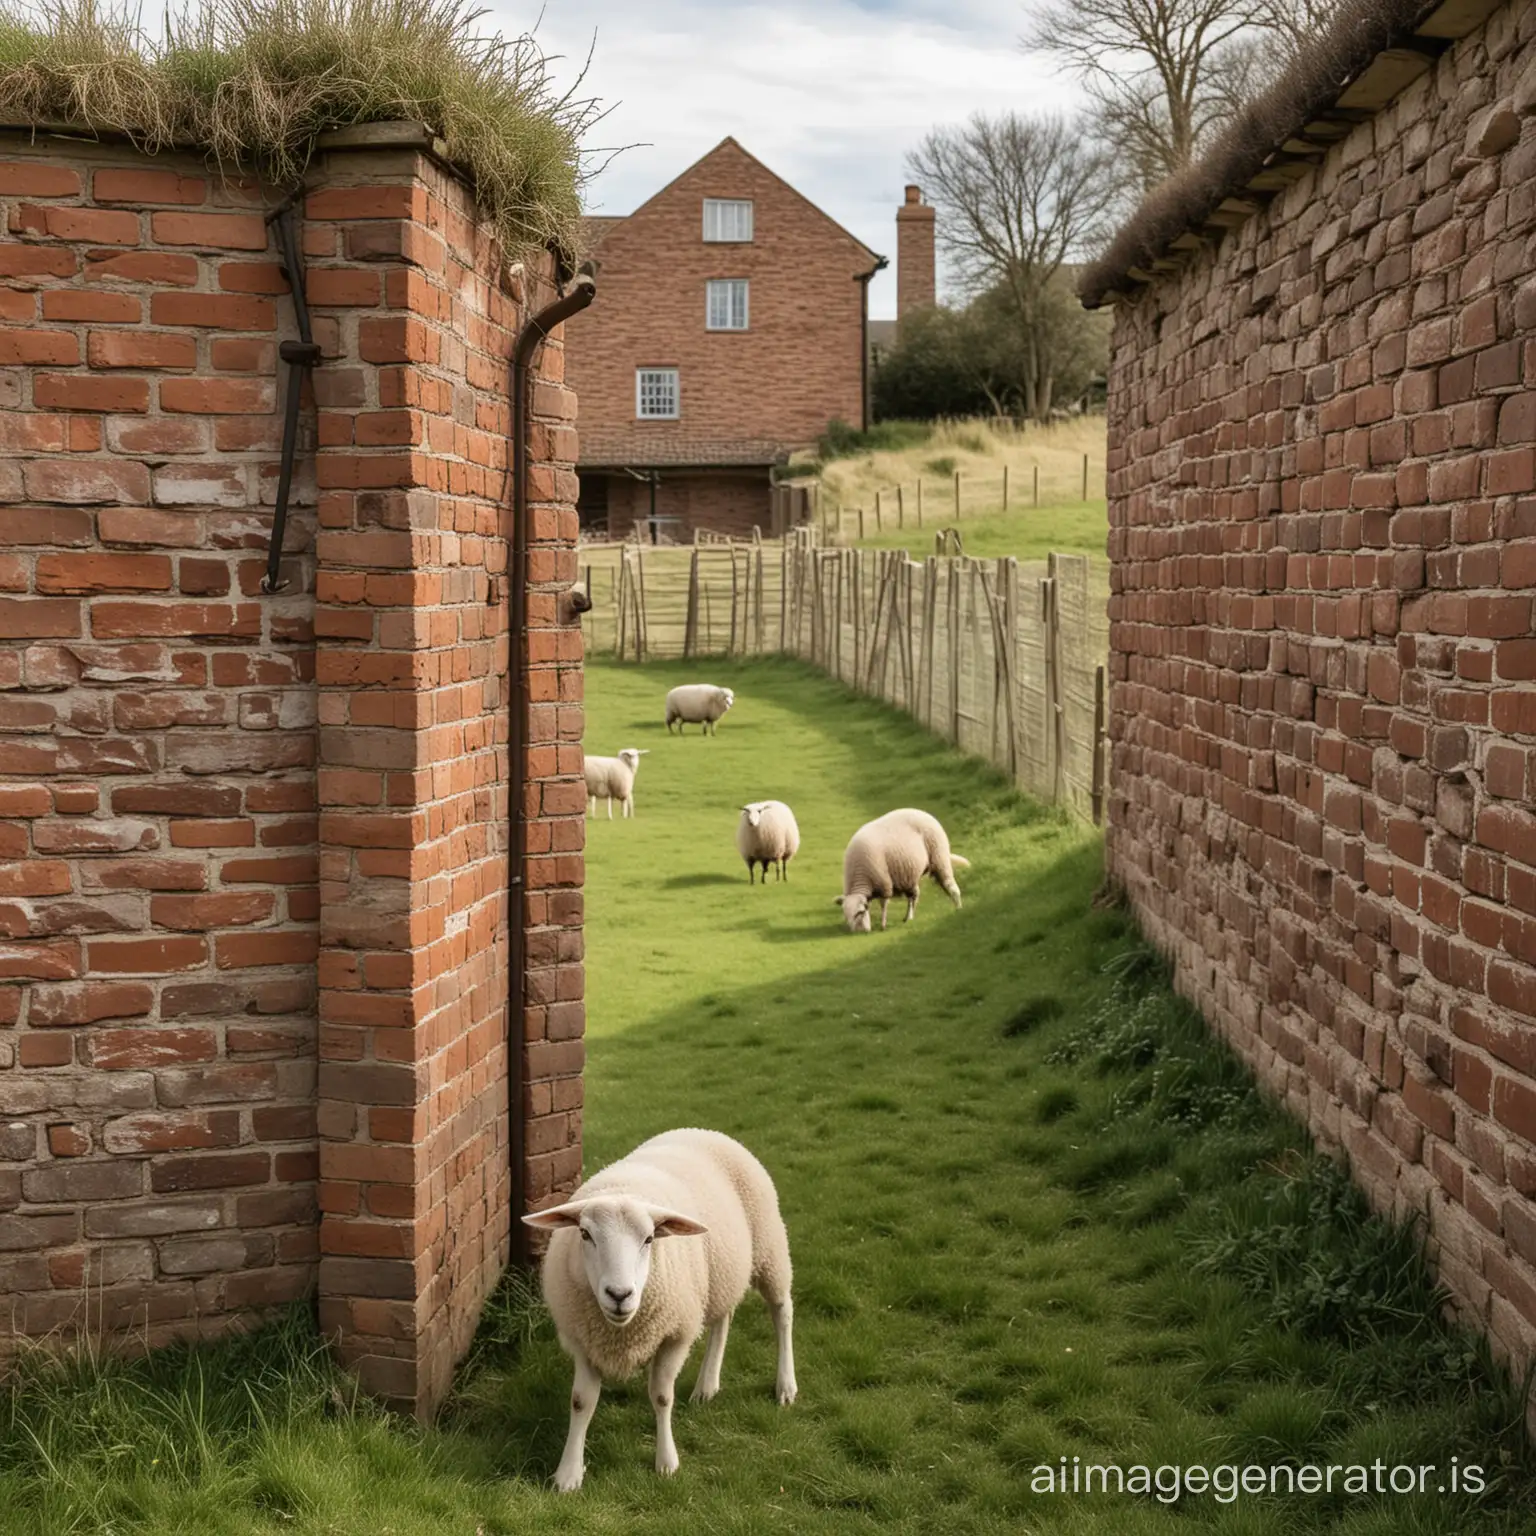 There is a grassy ground with a brick wall and behind the wall is a sheep peeking out and in front of it stands a butcher with a knife in his hand.